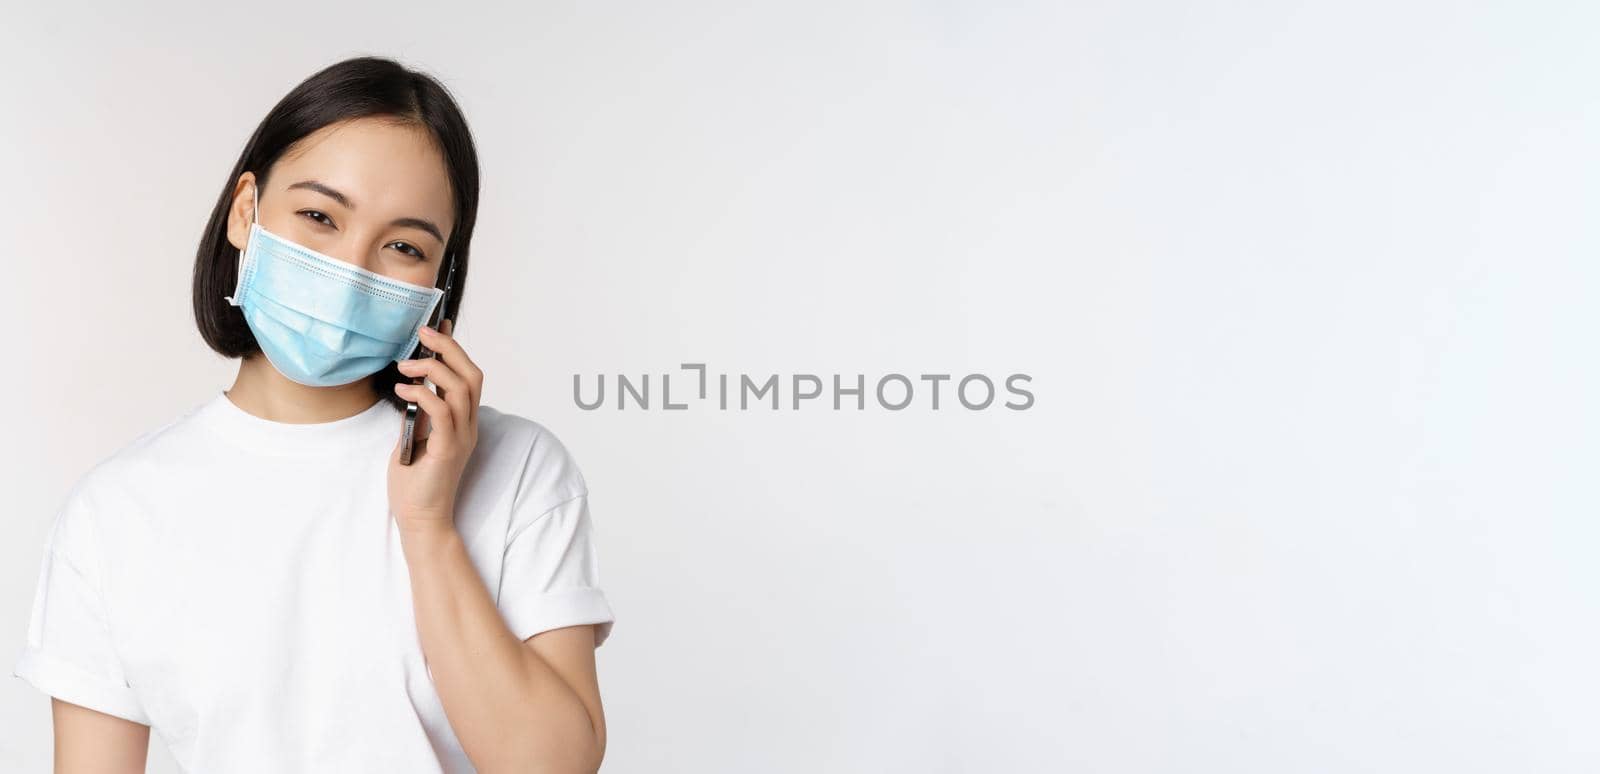 Health and covid-19 concept. Smiling asian girl in medical face mask talking on phone, answer mobile call, standing over white background.